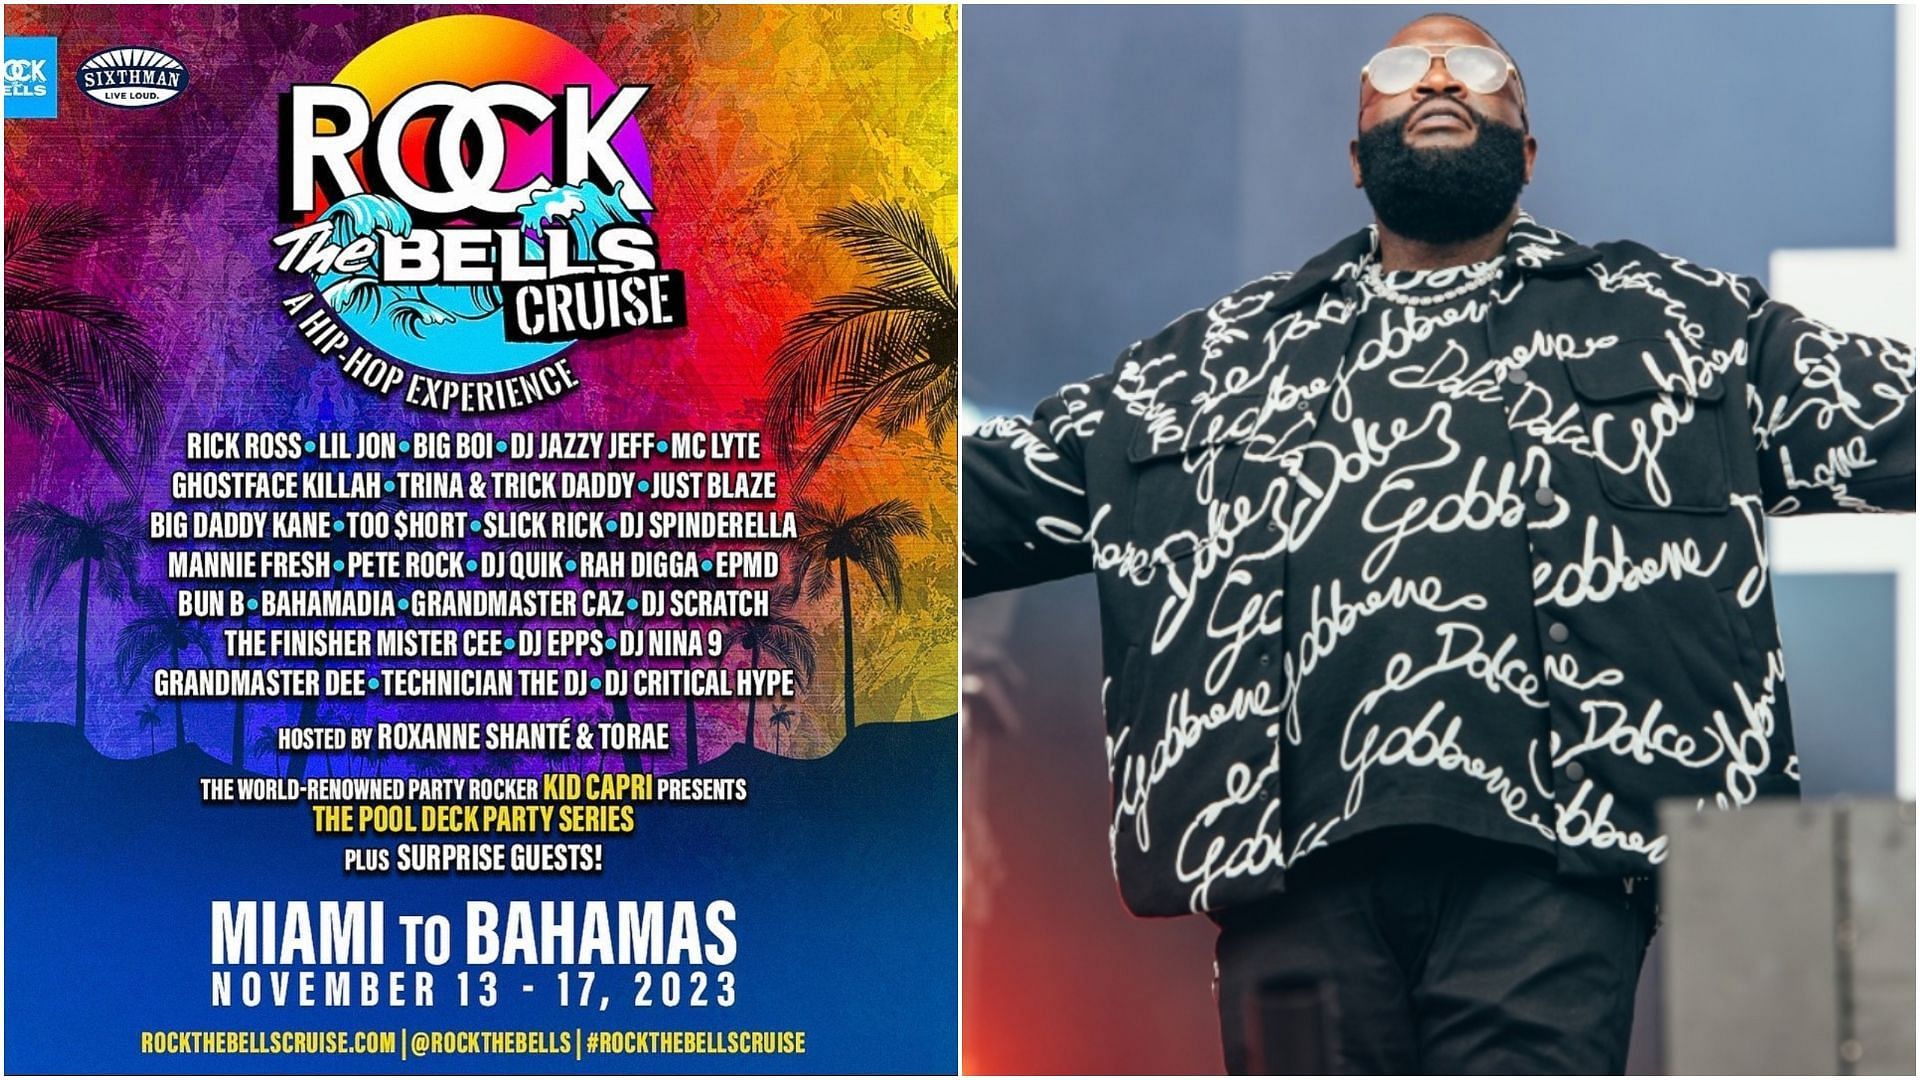 Rock the Bells Cruise 2023 Lineup, tickets, where to buy and more